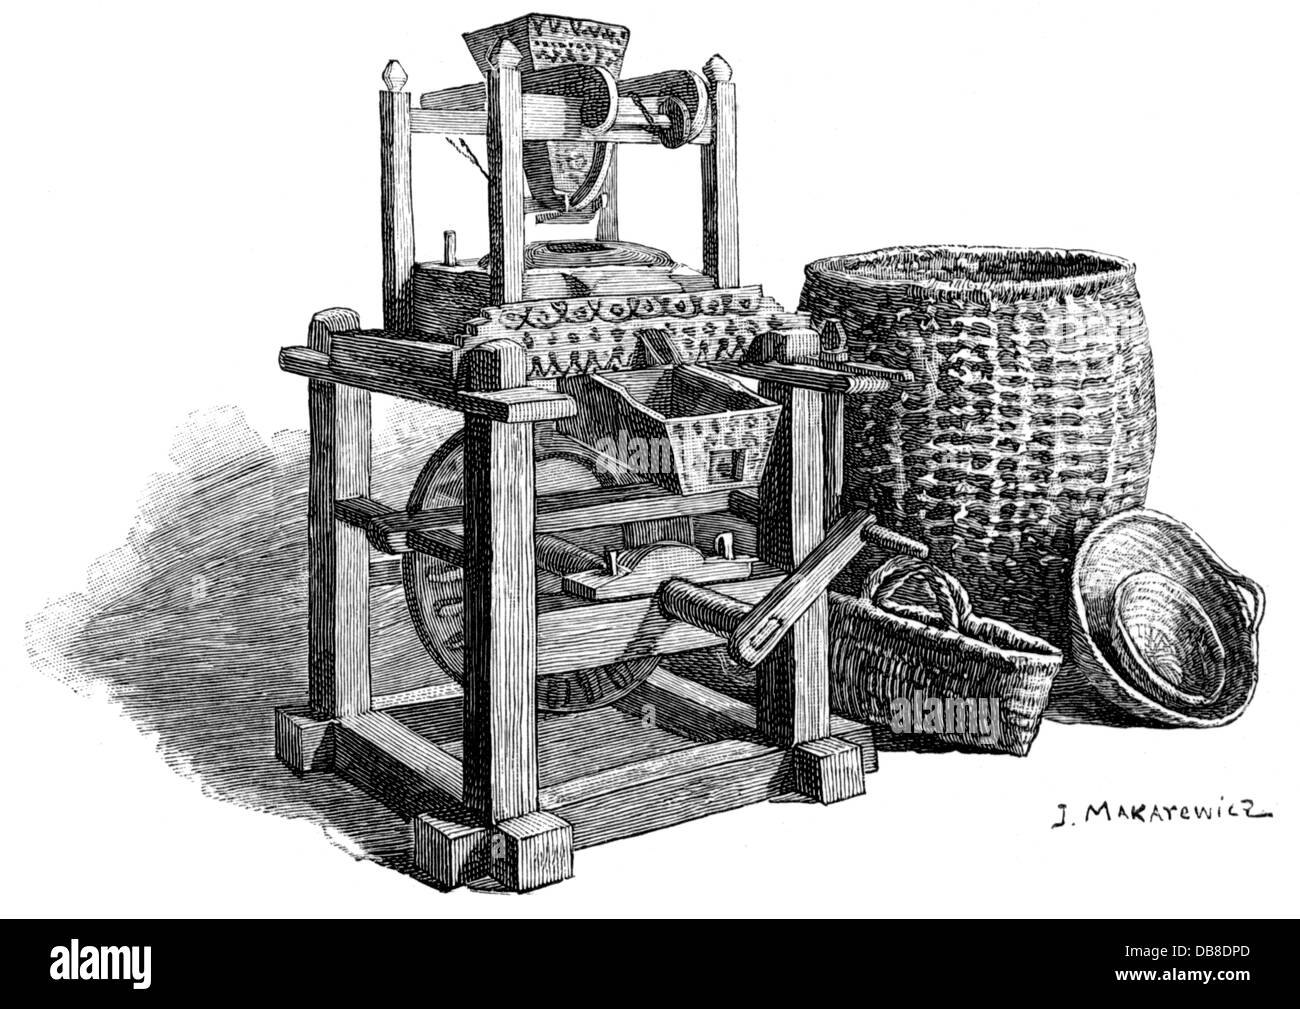 agriculture, machines, quern, wood engraving by J.Makarewicz, 19th century, 19th century, graphic, graphics, grain, mills, mill, milling, grind, grind up, grinding, crank handle, crank handles, technology, engineering, technologies, technics, basket, baskets, grinder, grinders, agriculture, farming, machine, machines, quern, querns, historic, historical, Additional-Rights-Clearences-Not Available Stock Photo